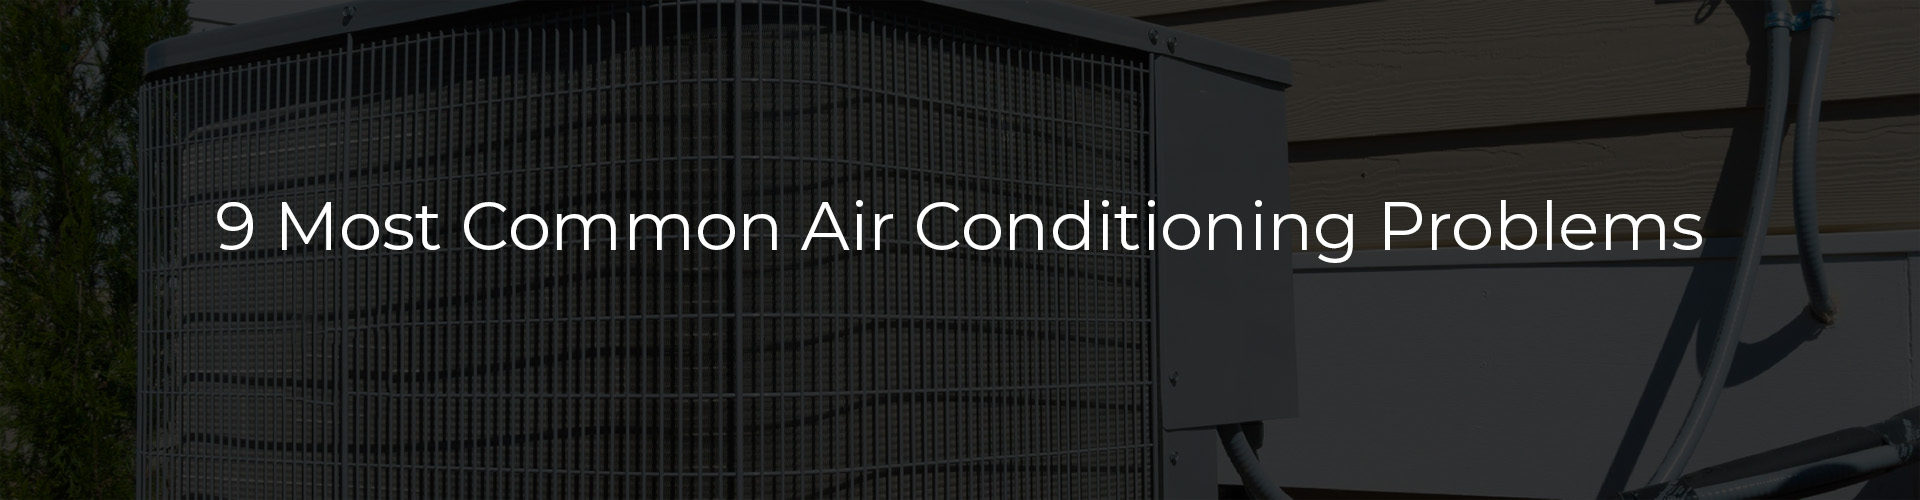 9 common air conditioning problems